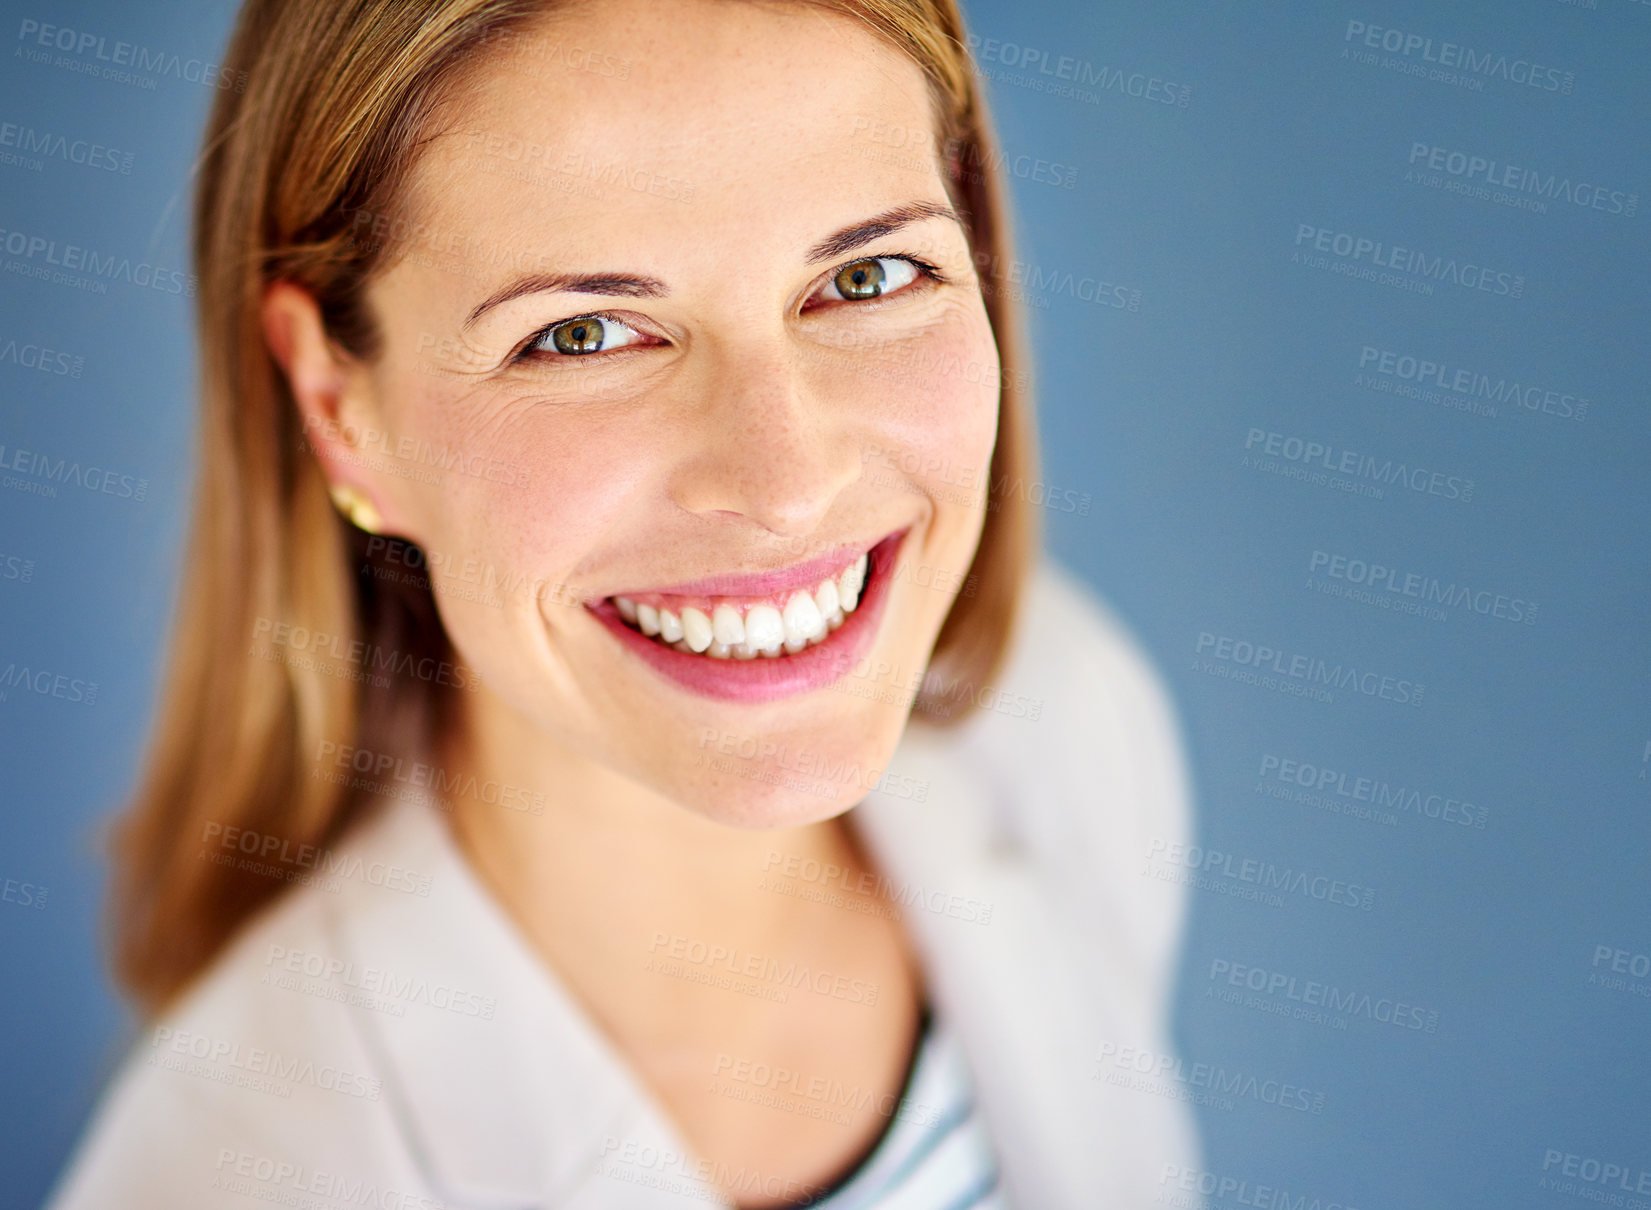 Buy stock photo Shot of a woman dressed in office-wear posing against a blue background